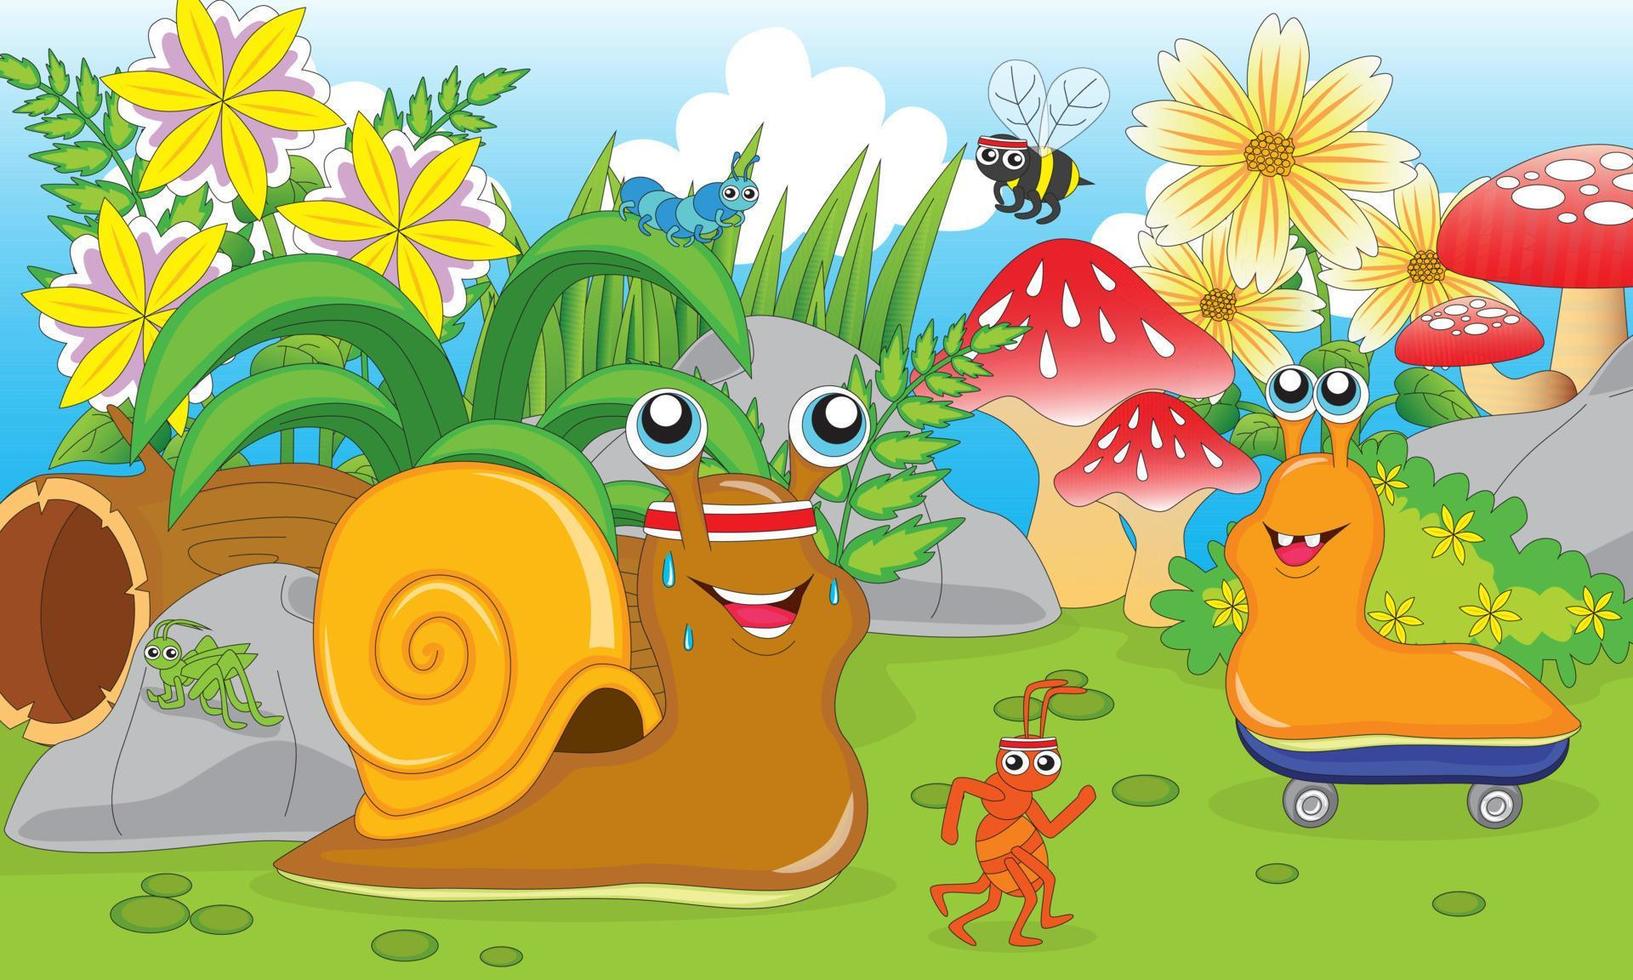 cute snails and ants doing sports, children's book illustrations, education, posters, websites, printing and more vector